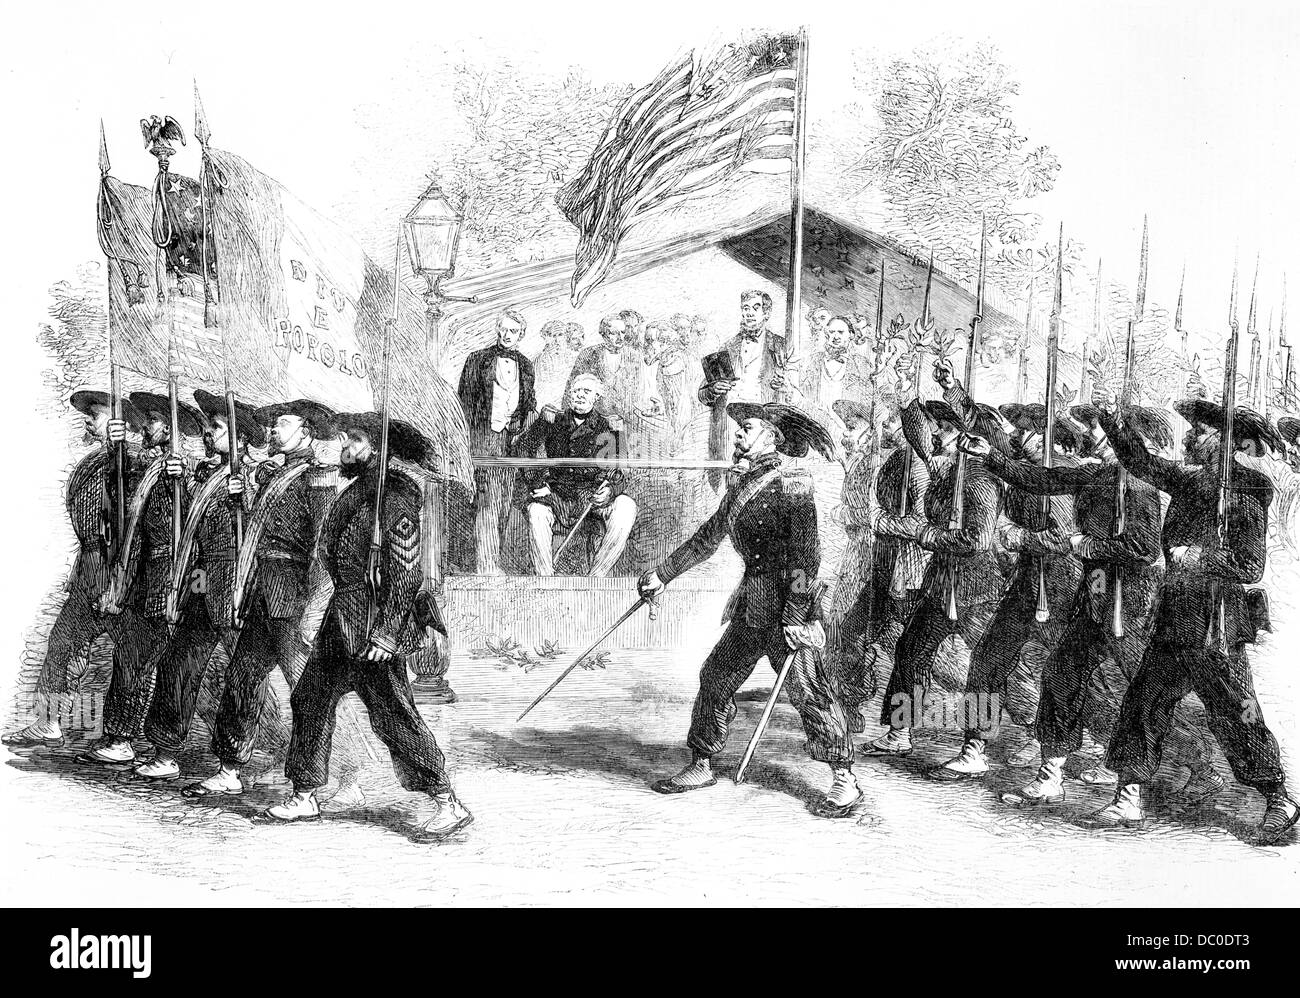 1800s 1860s JULY 4 1861 REVIEW FEDERAL TROOPS PRESIDENT ABRAHAM LINCOLN & GENERAL SCOTT 39TH NY INFANTRY GARIBALDI GUARD Stock Photo